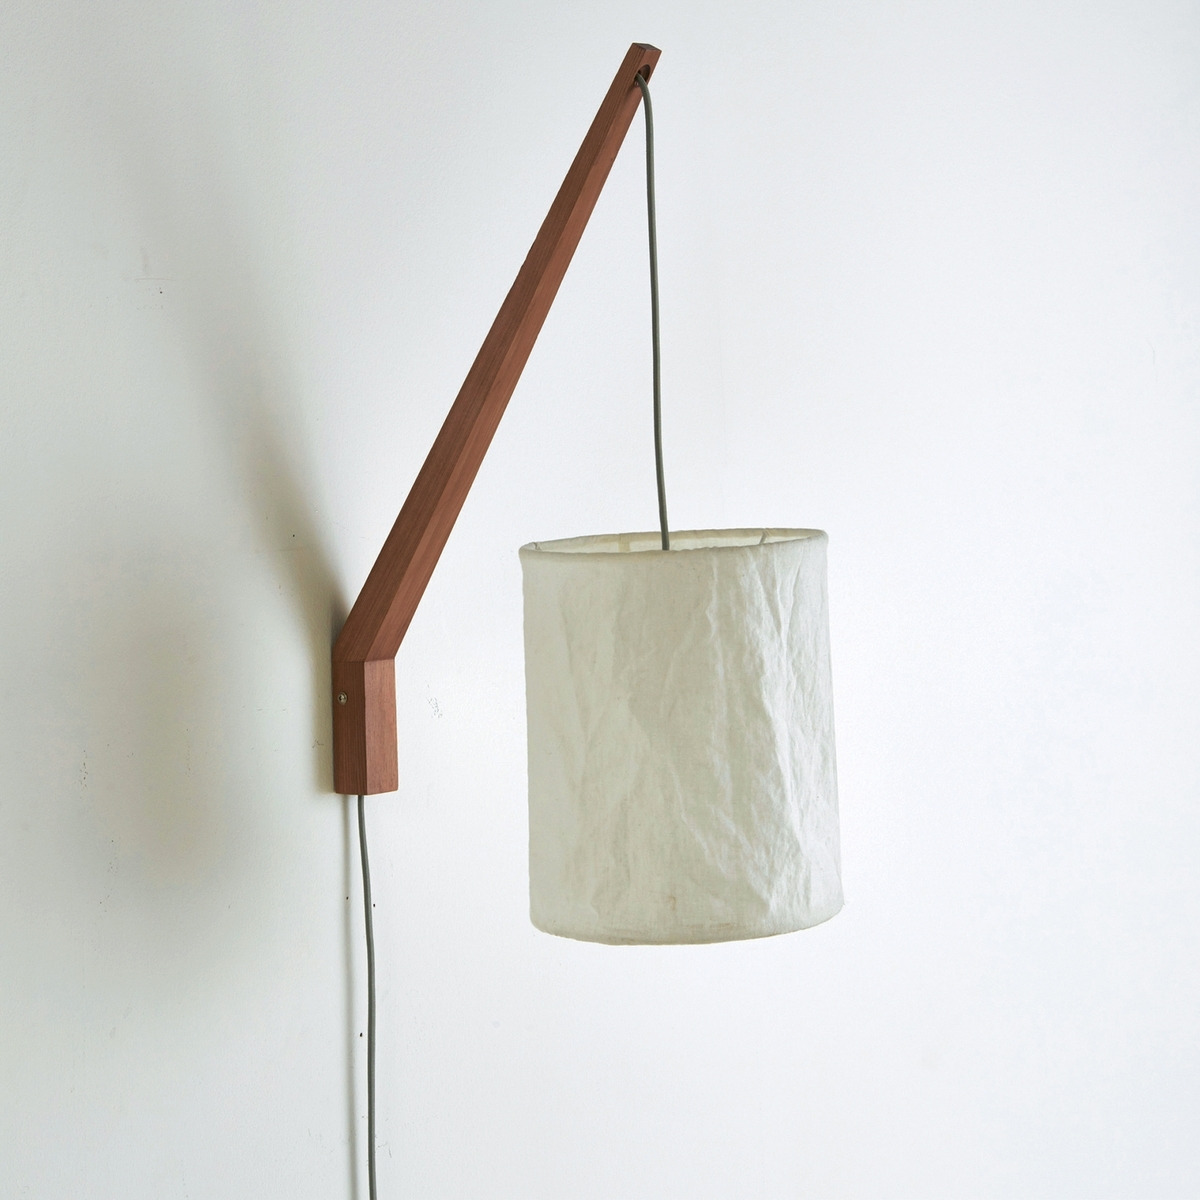 Setto Wall Light in Ash & Linen - image 1